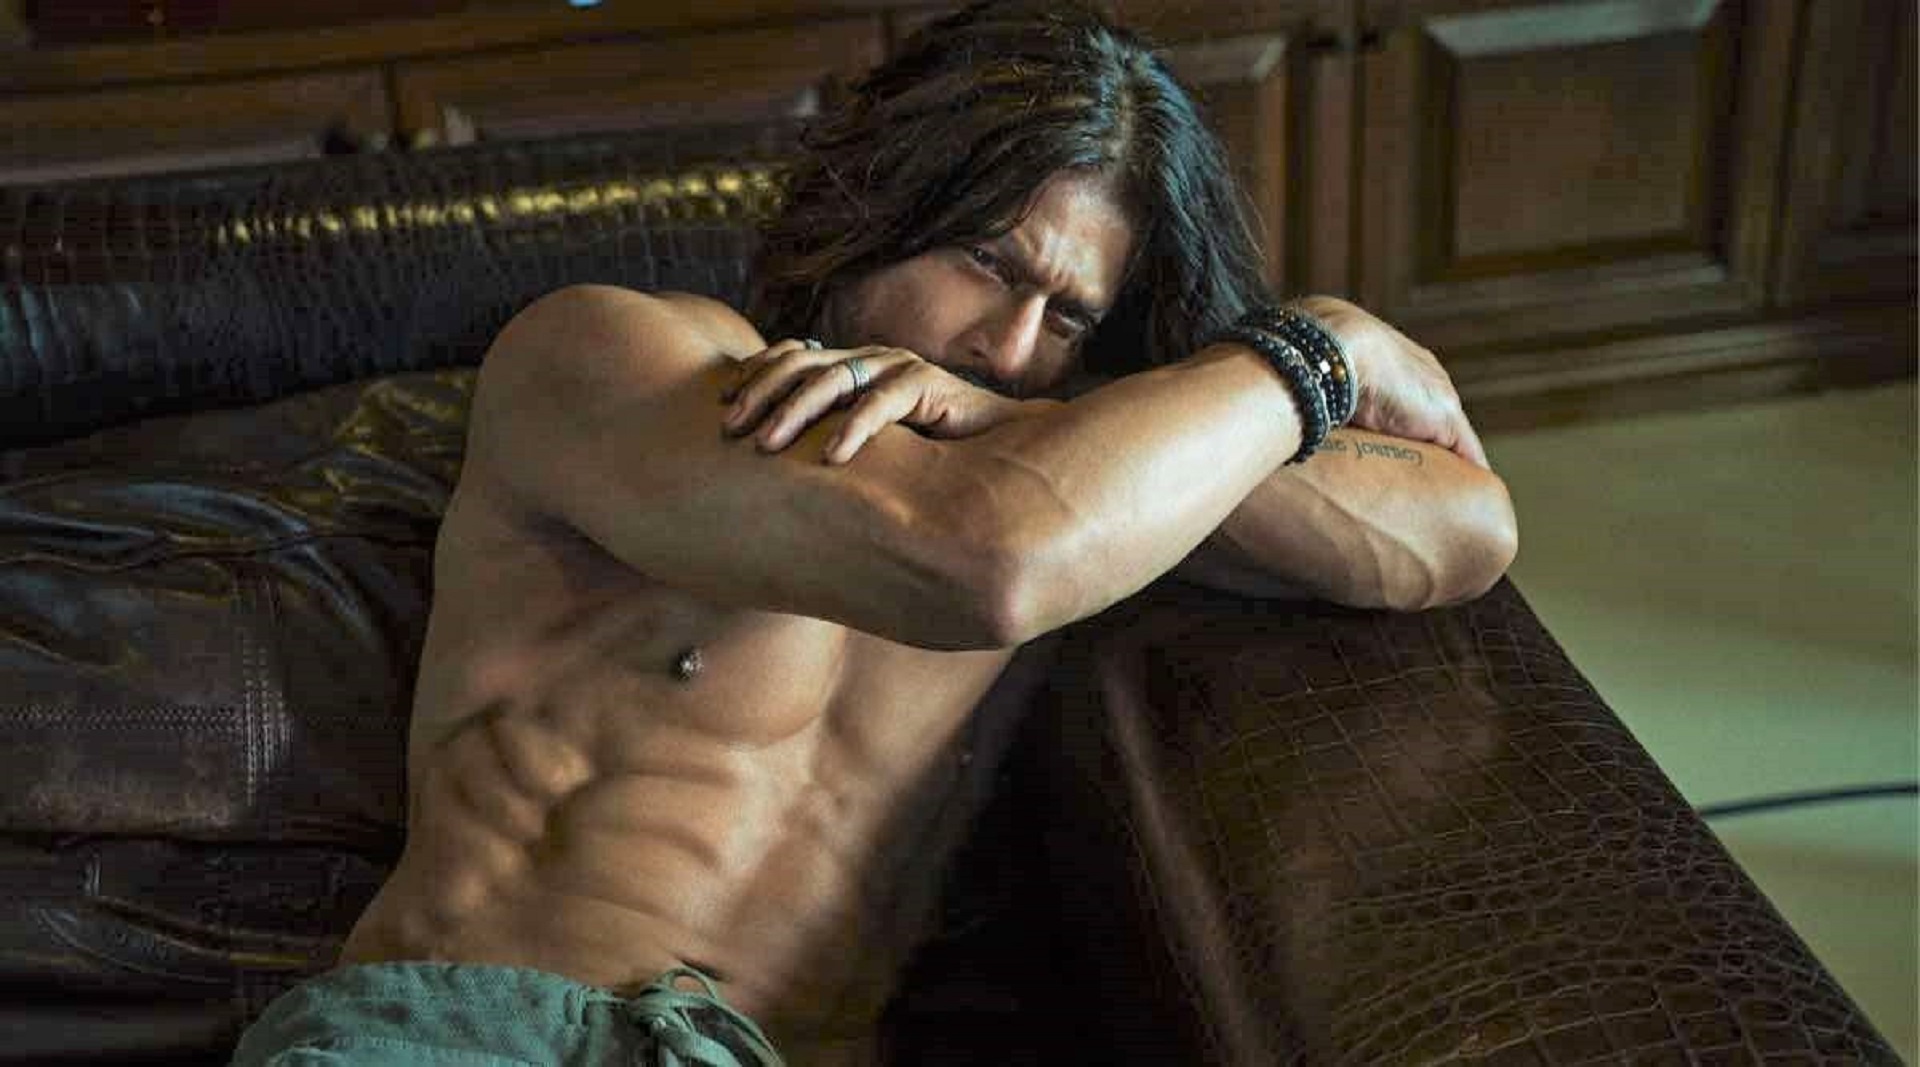 Shah Rukh Khan Shares EXCLUSIVE New Look From Pathaan: With Toned Body And Chiseled Abs